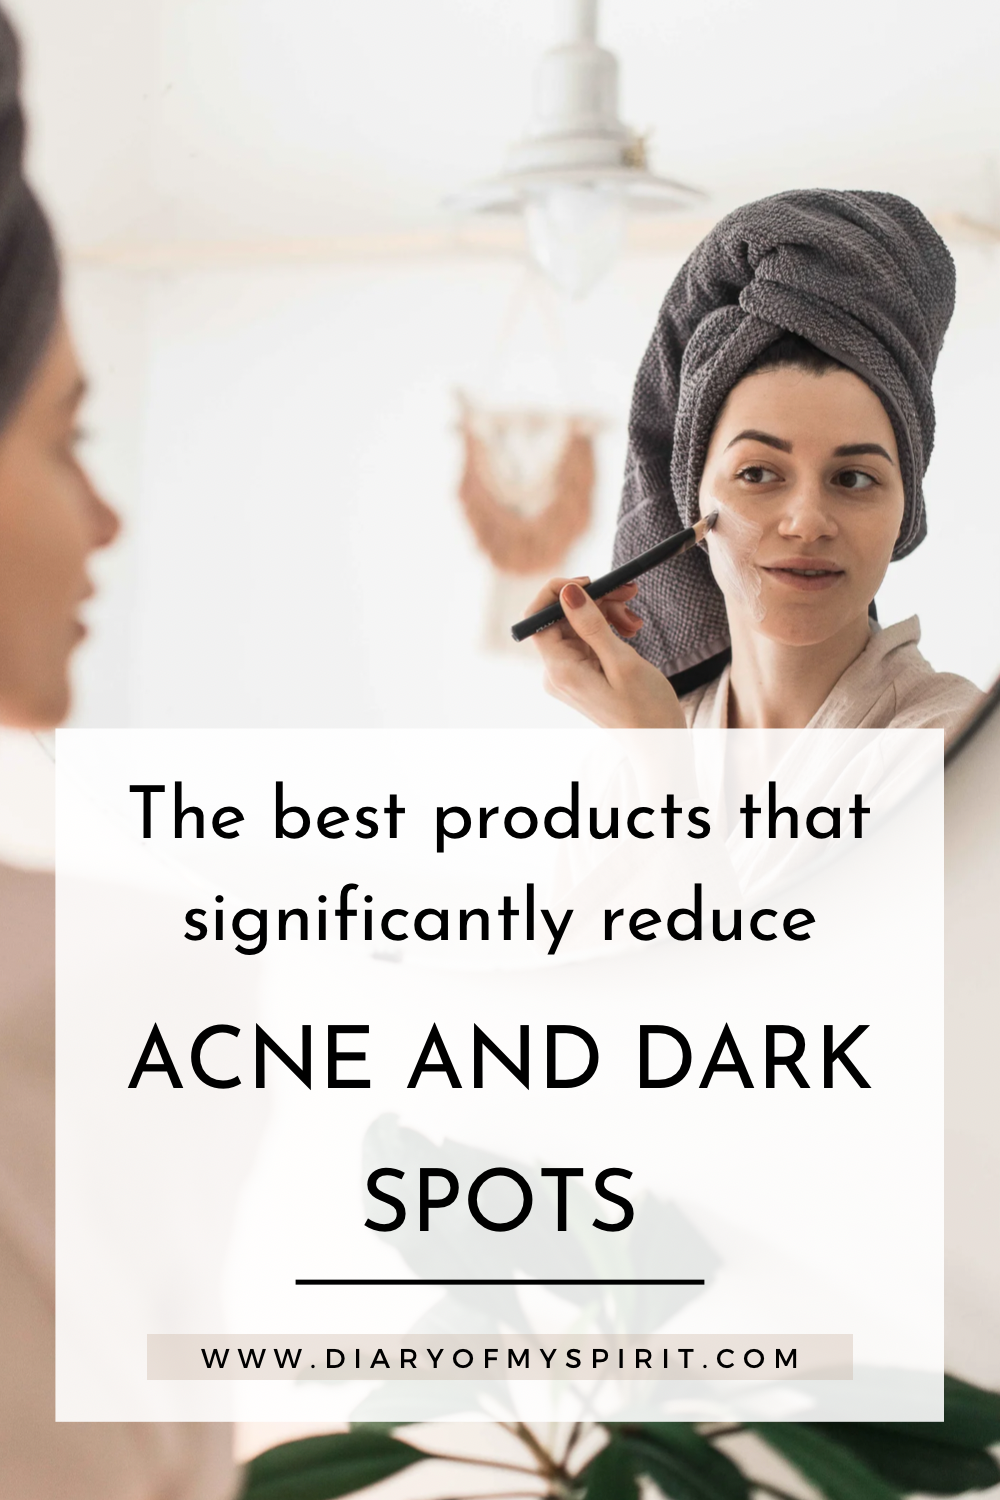 The best products that significantly reduce acne and dark spots - all acne scars, pigmentation, uneven skin tone and discoloration